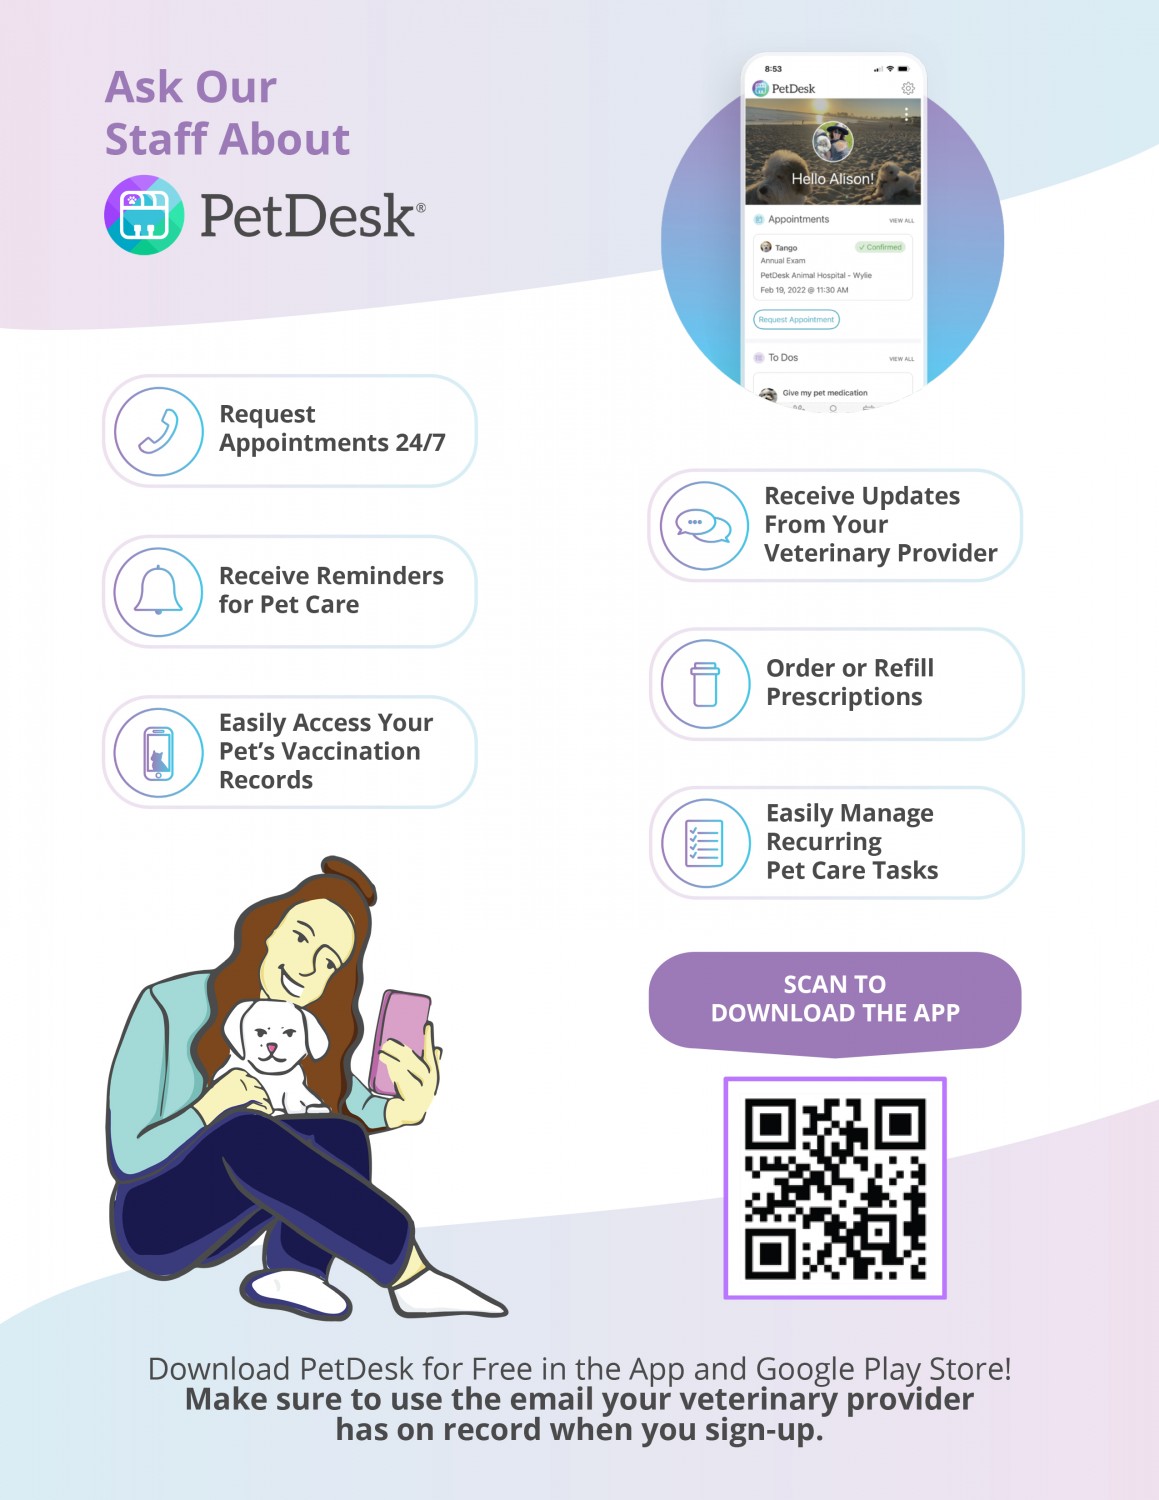 PetDesk App - Scan to Download - Get PetDesk from the App and Google Play Store